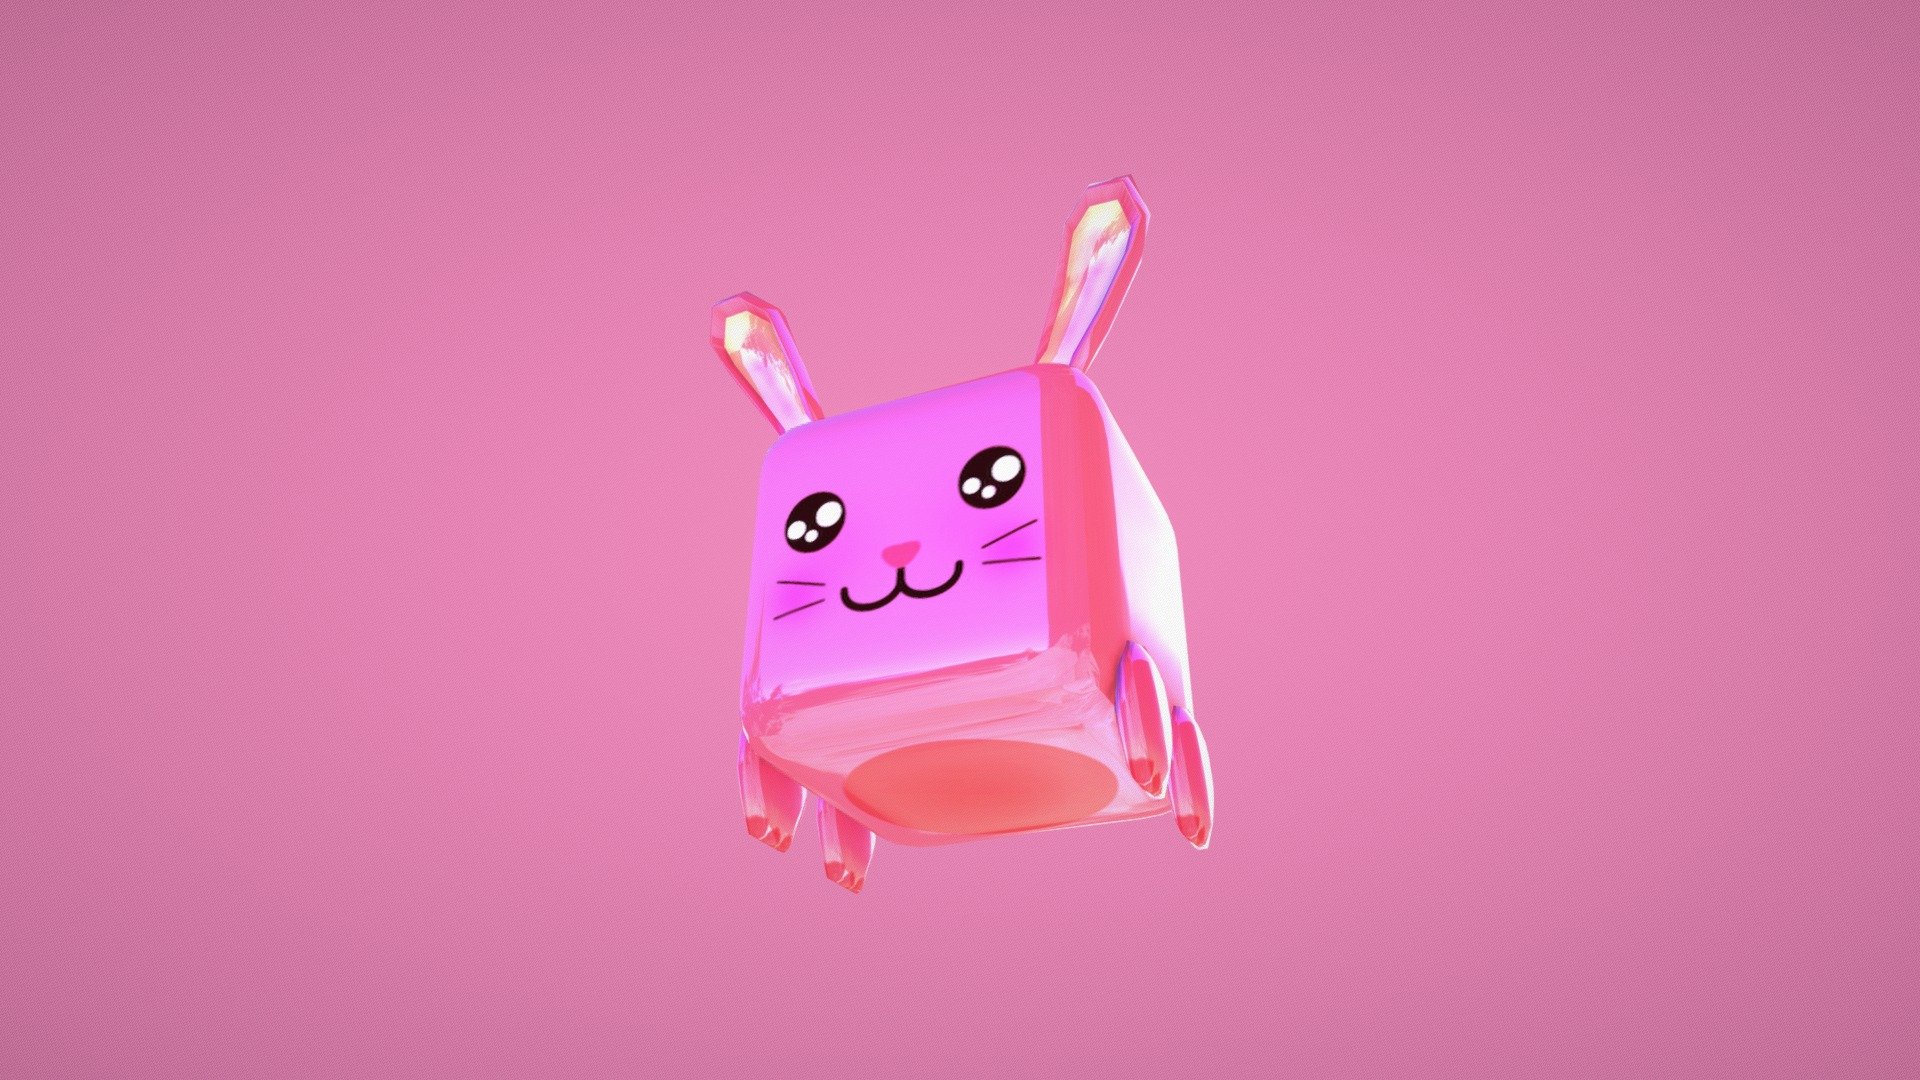 ⚫Built with the intention of developing games on the platform, the group is focused on entertainment and content creation that the entire community can enjoy!

🔴Item of Magic City

Name: &ldquo;Cute Bunny - Pet